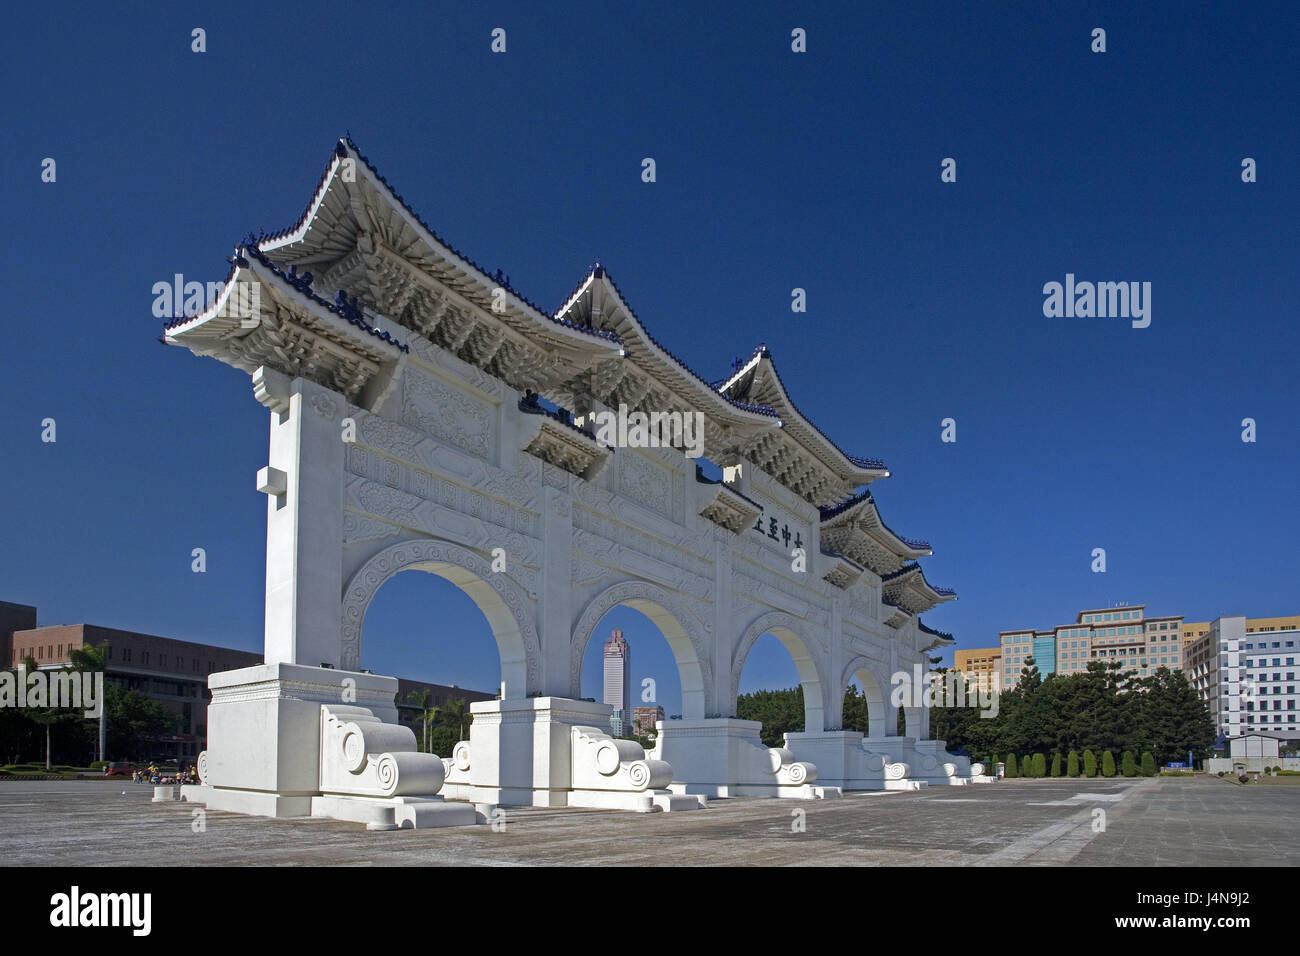 Taiwan, Taipeh, national Taiwan democracy-commemorative hall, gate, Asia, Eastern Asia, place of interest, building, architecture, goal building, outside, deserted, Stock Photo